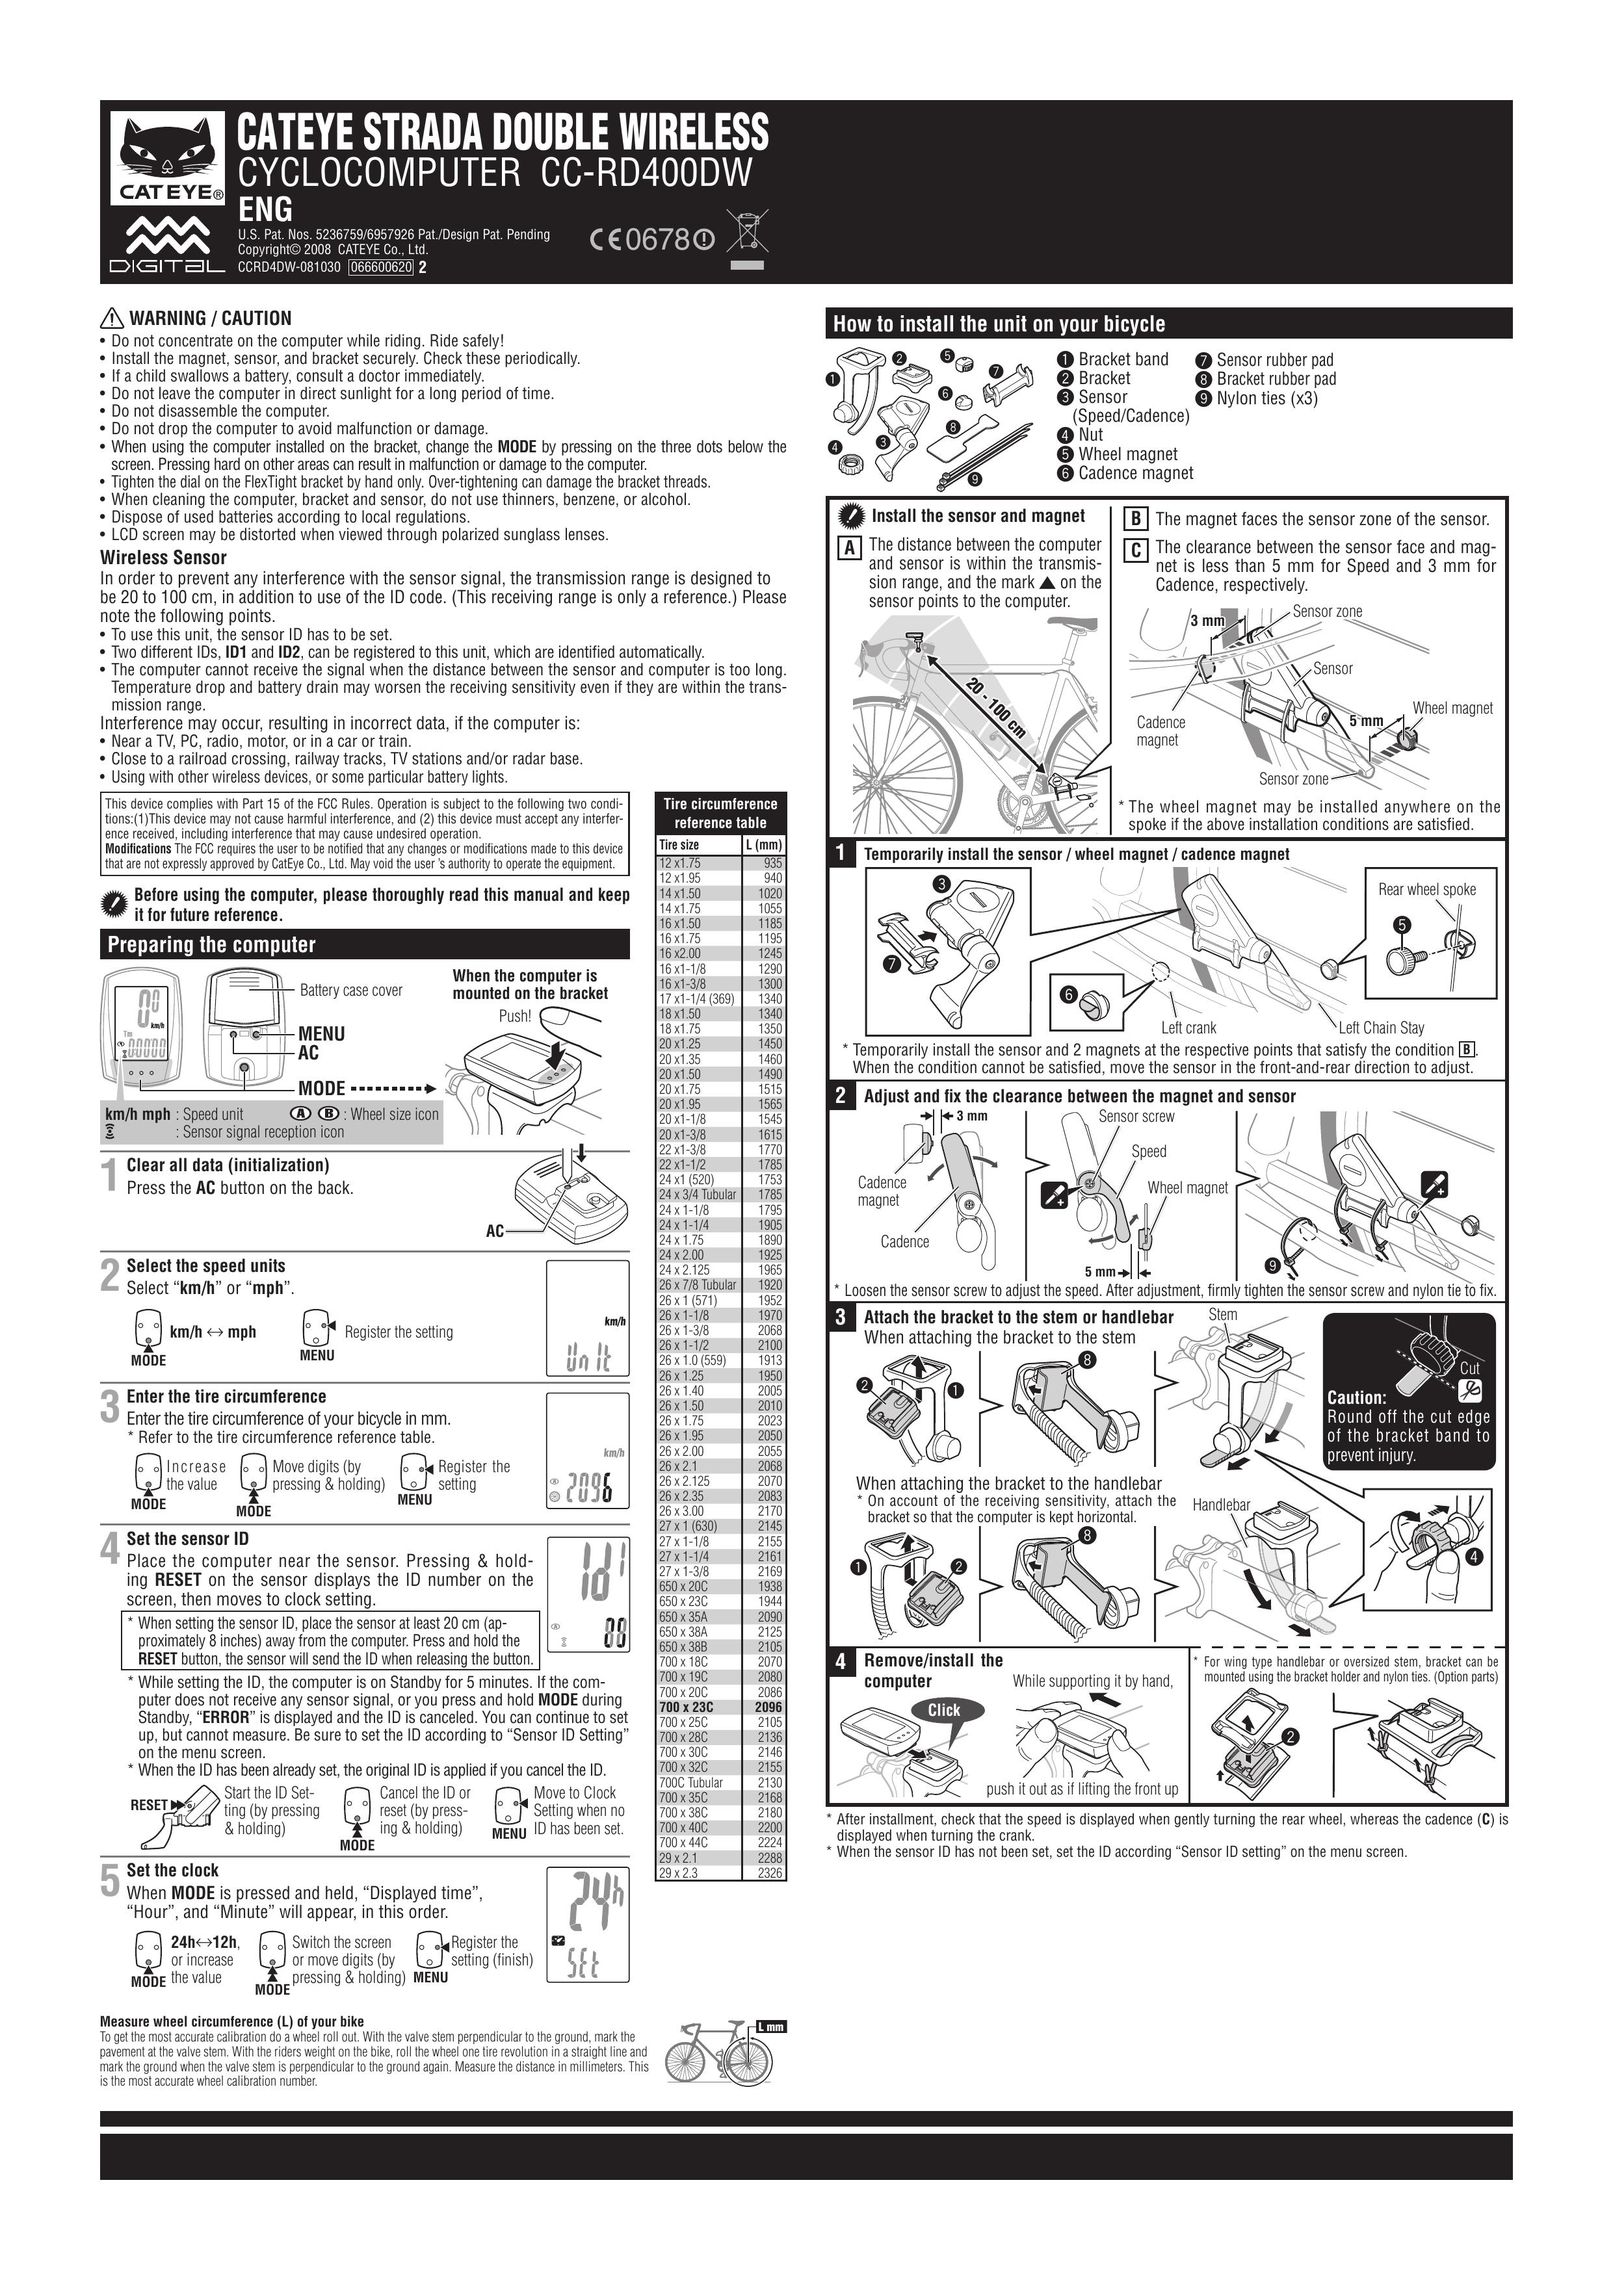 Cateye CC-RD400DW Bicycle Accessories User Manual